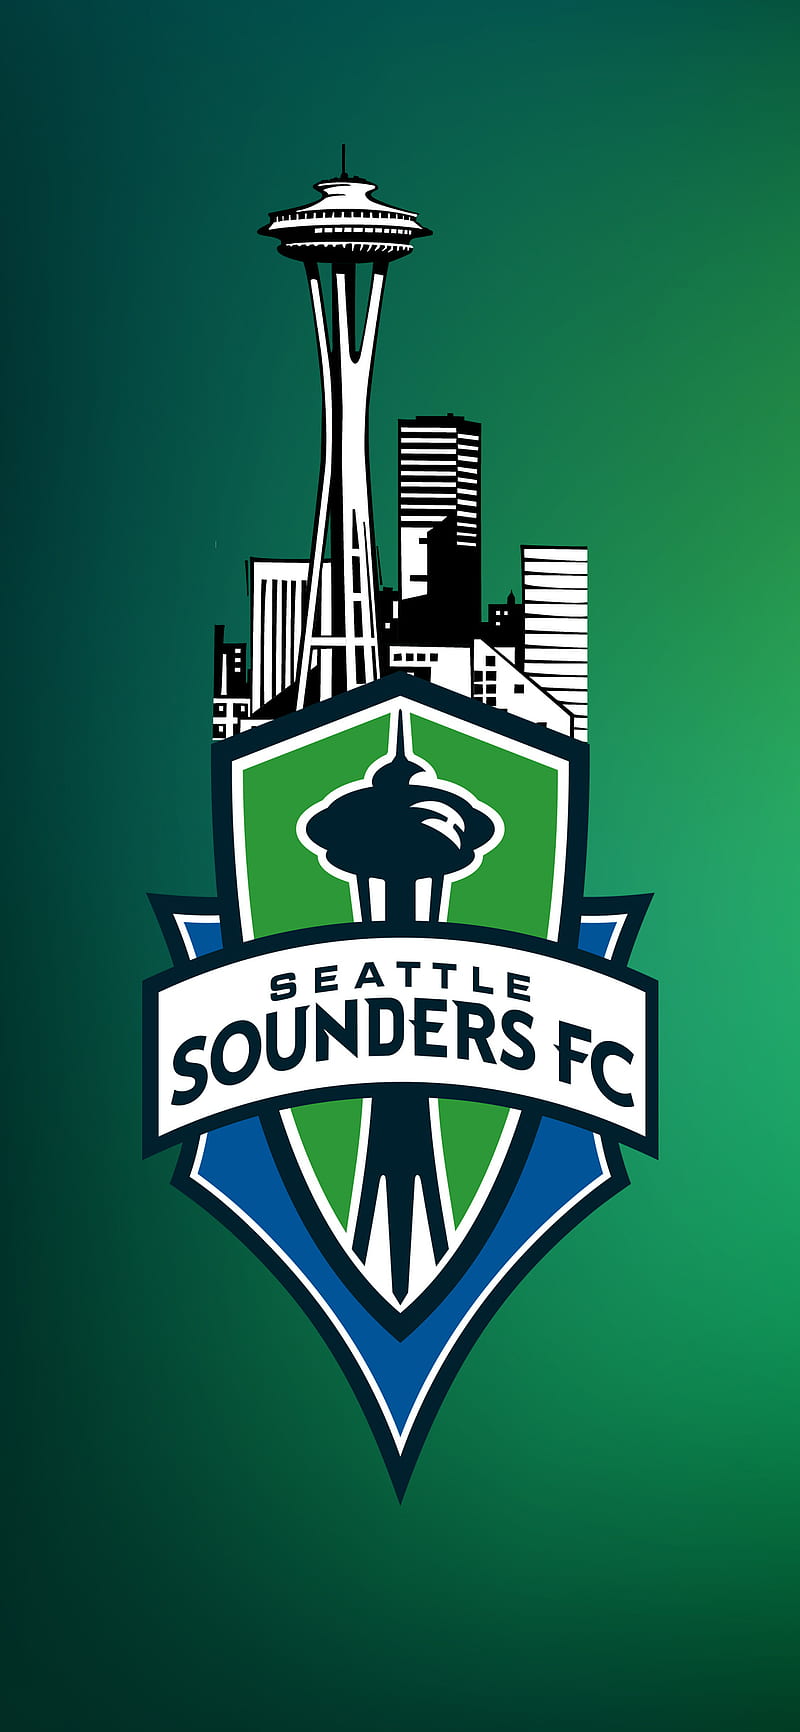 1920x1080px, 1080P free download | Seattle Sounders, football, green ...